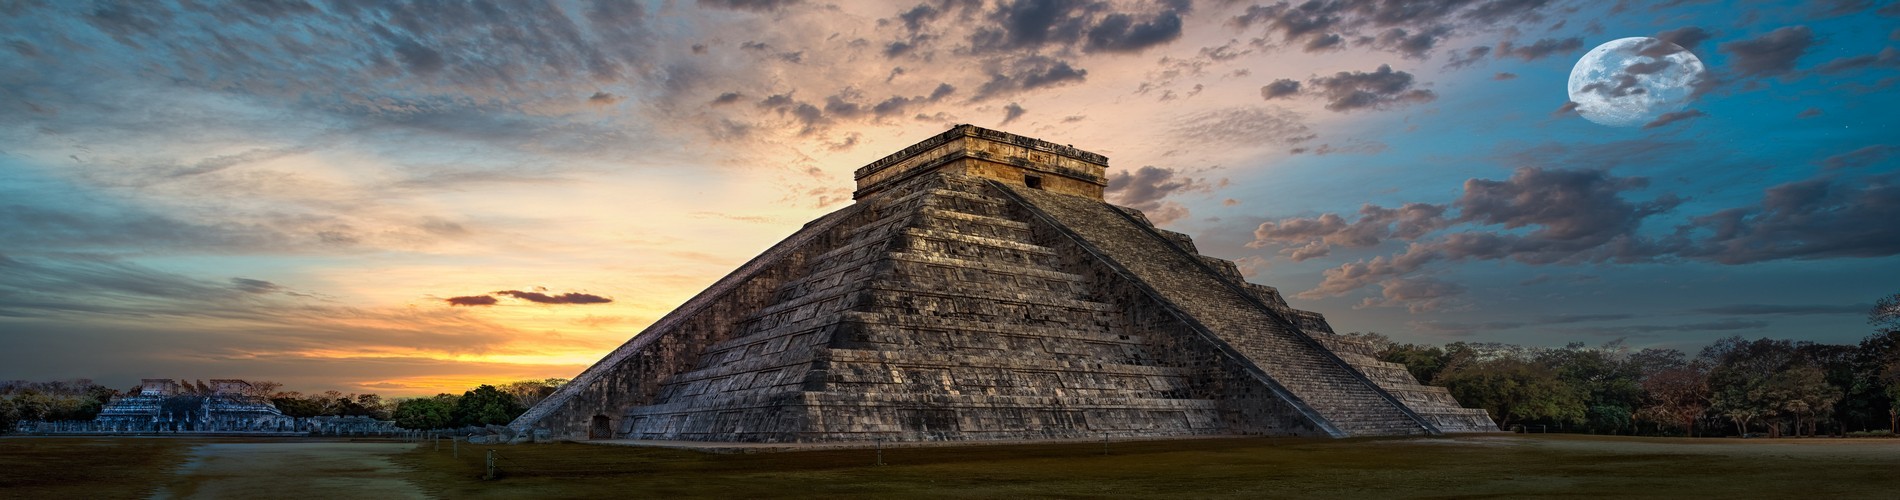 EXPLORING MEXICO'S MAYAN ARCHAEOLOGICAL SITES